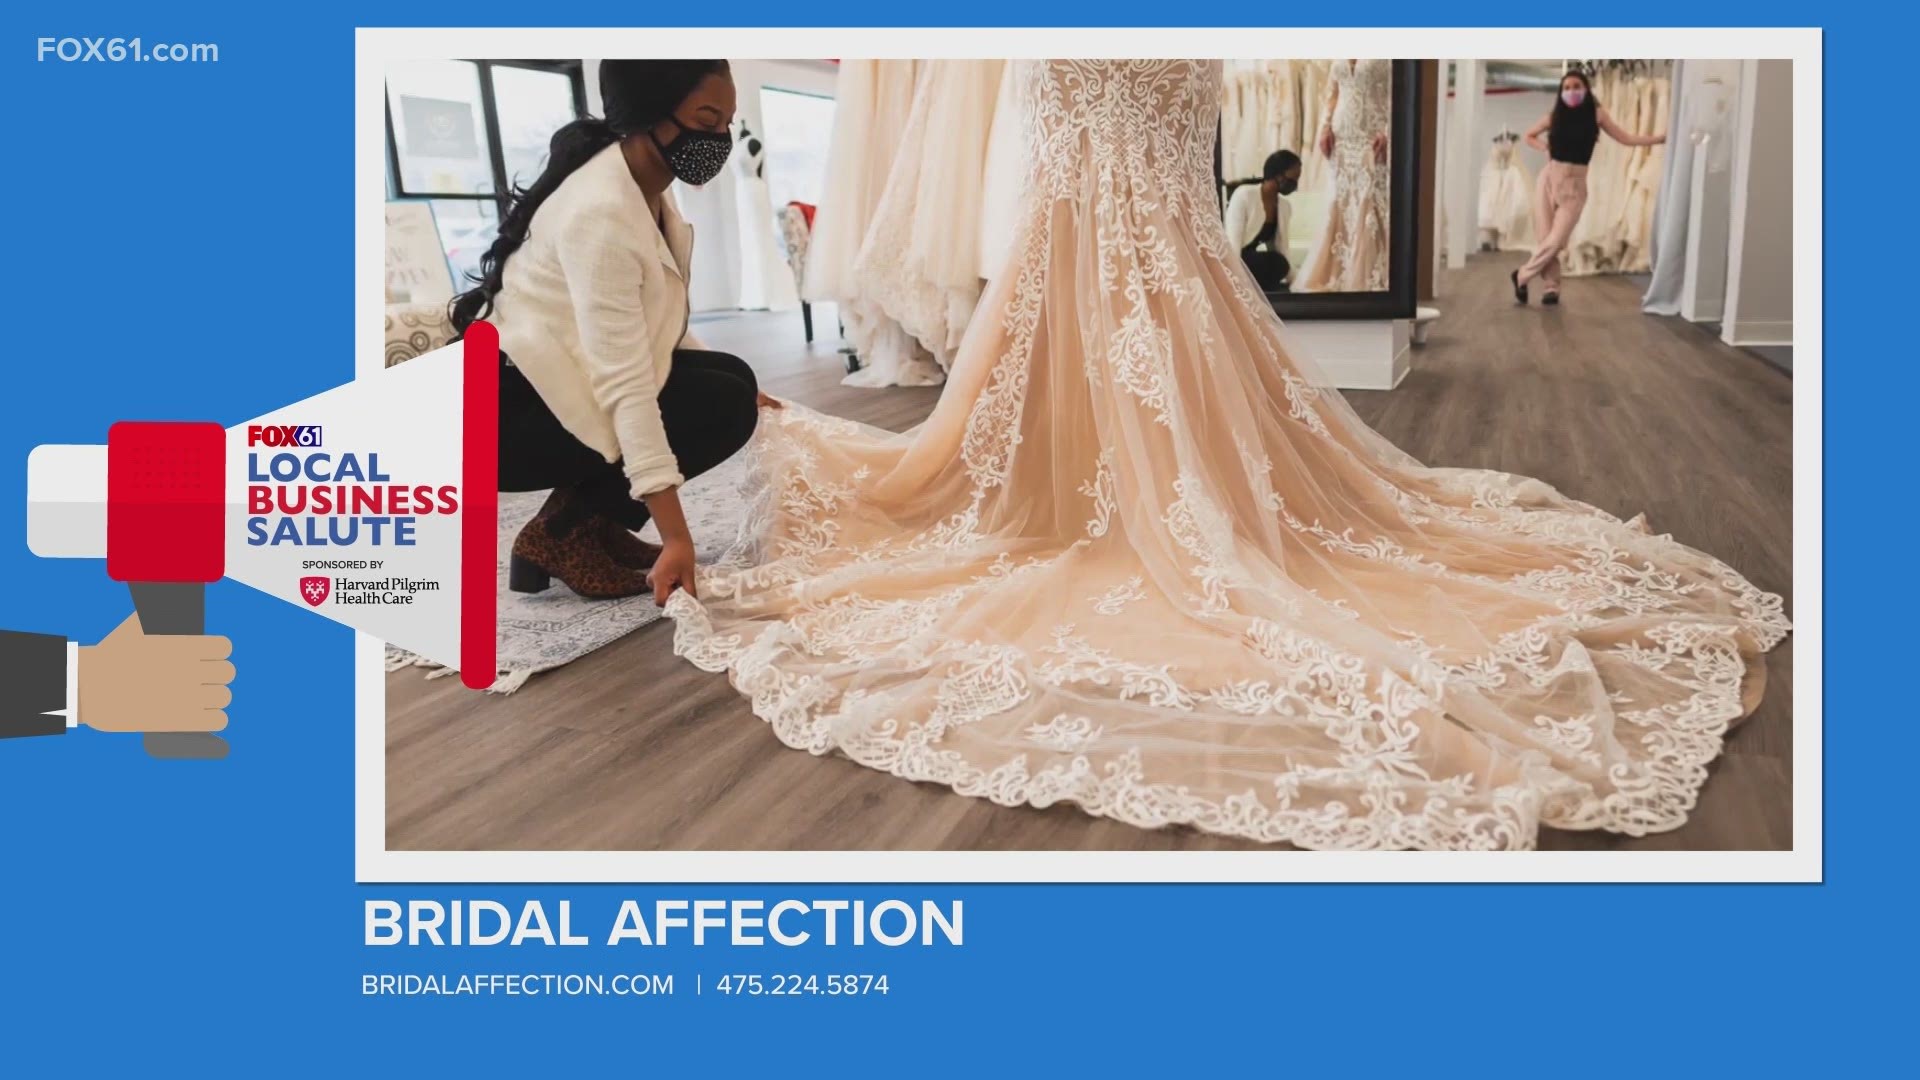 Bridal Affection in Hamden believes that you can purchase your dream wedding gown without breaking the bank.